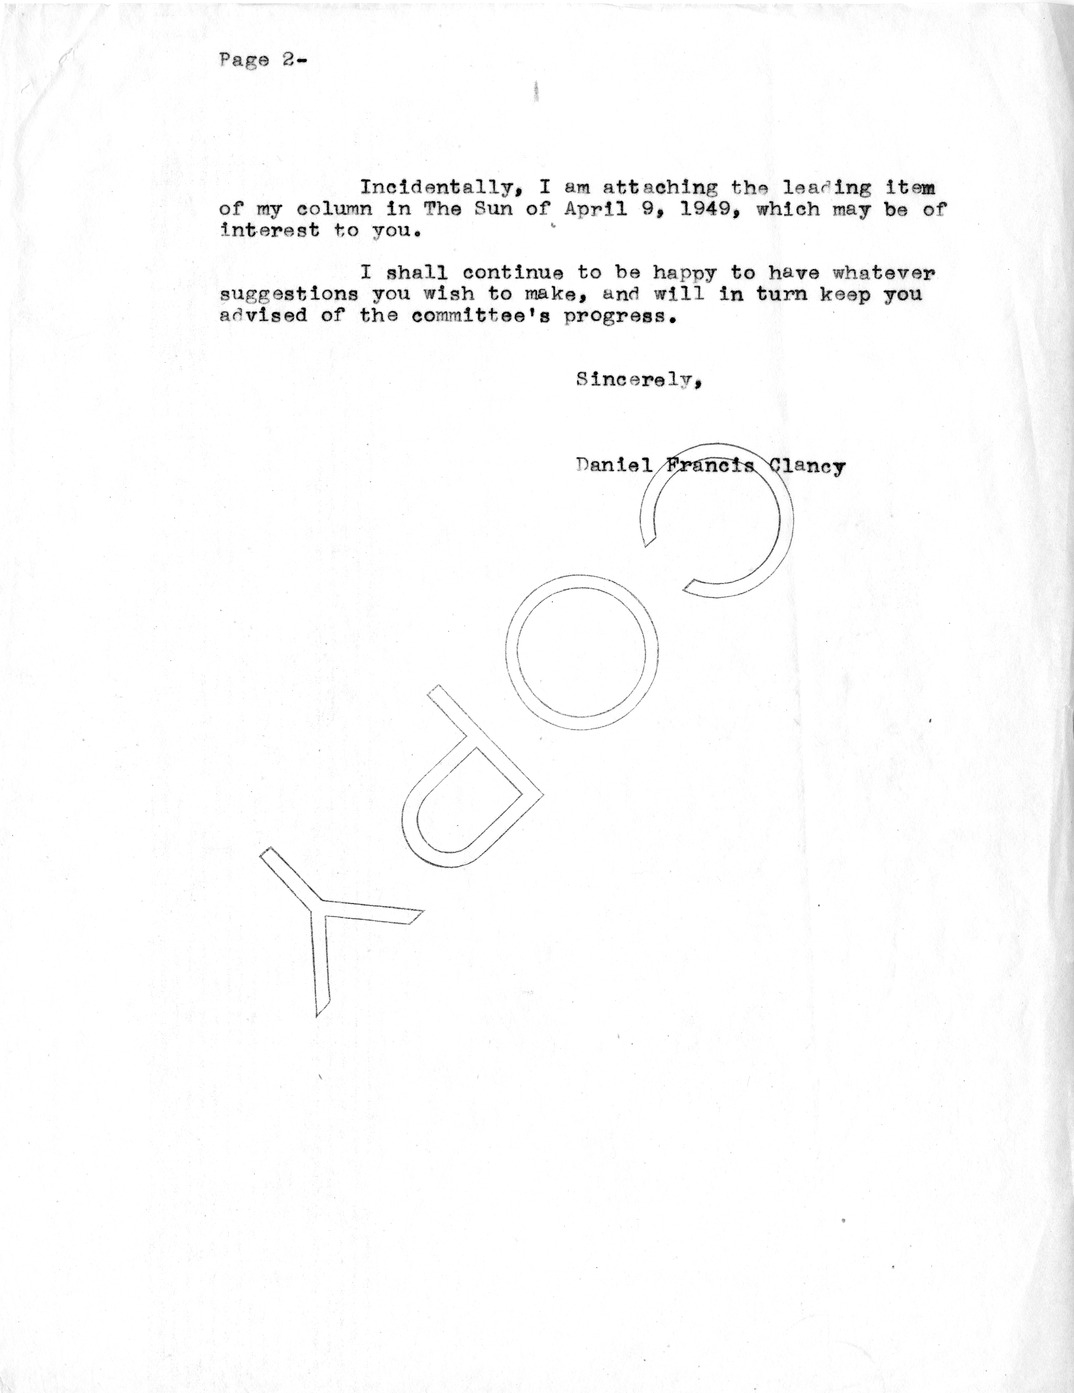 Letter from Daniel F. Clancy to Harold Ickes